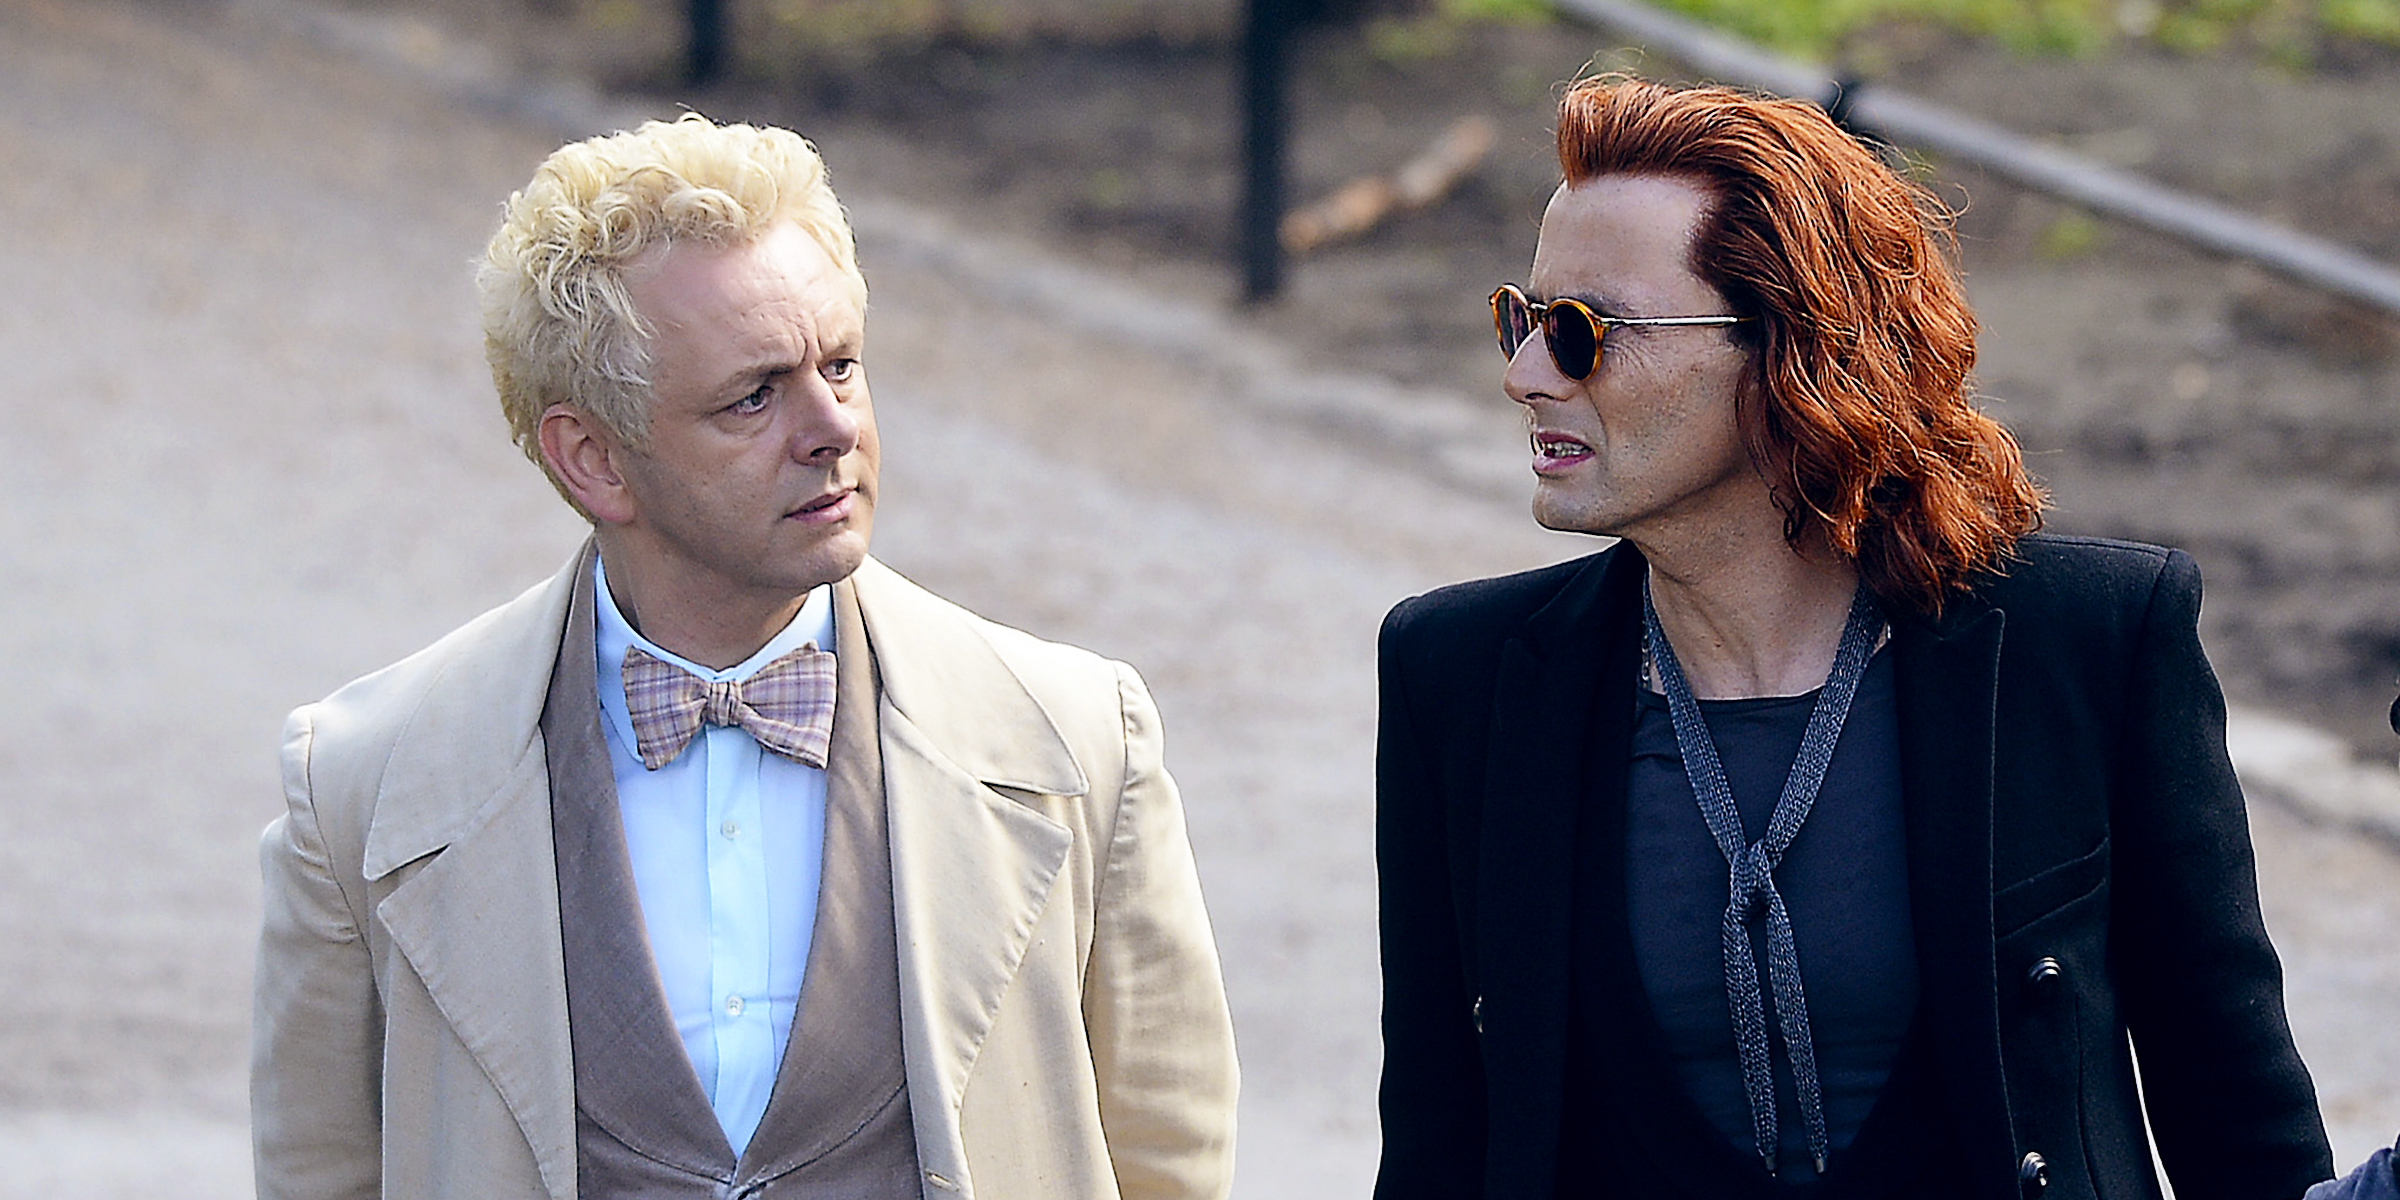 Michael Sheen as Arizaphale and David Tennant as Crowley. | Source: Getty Images